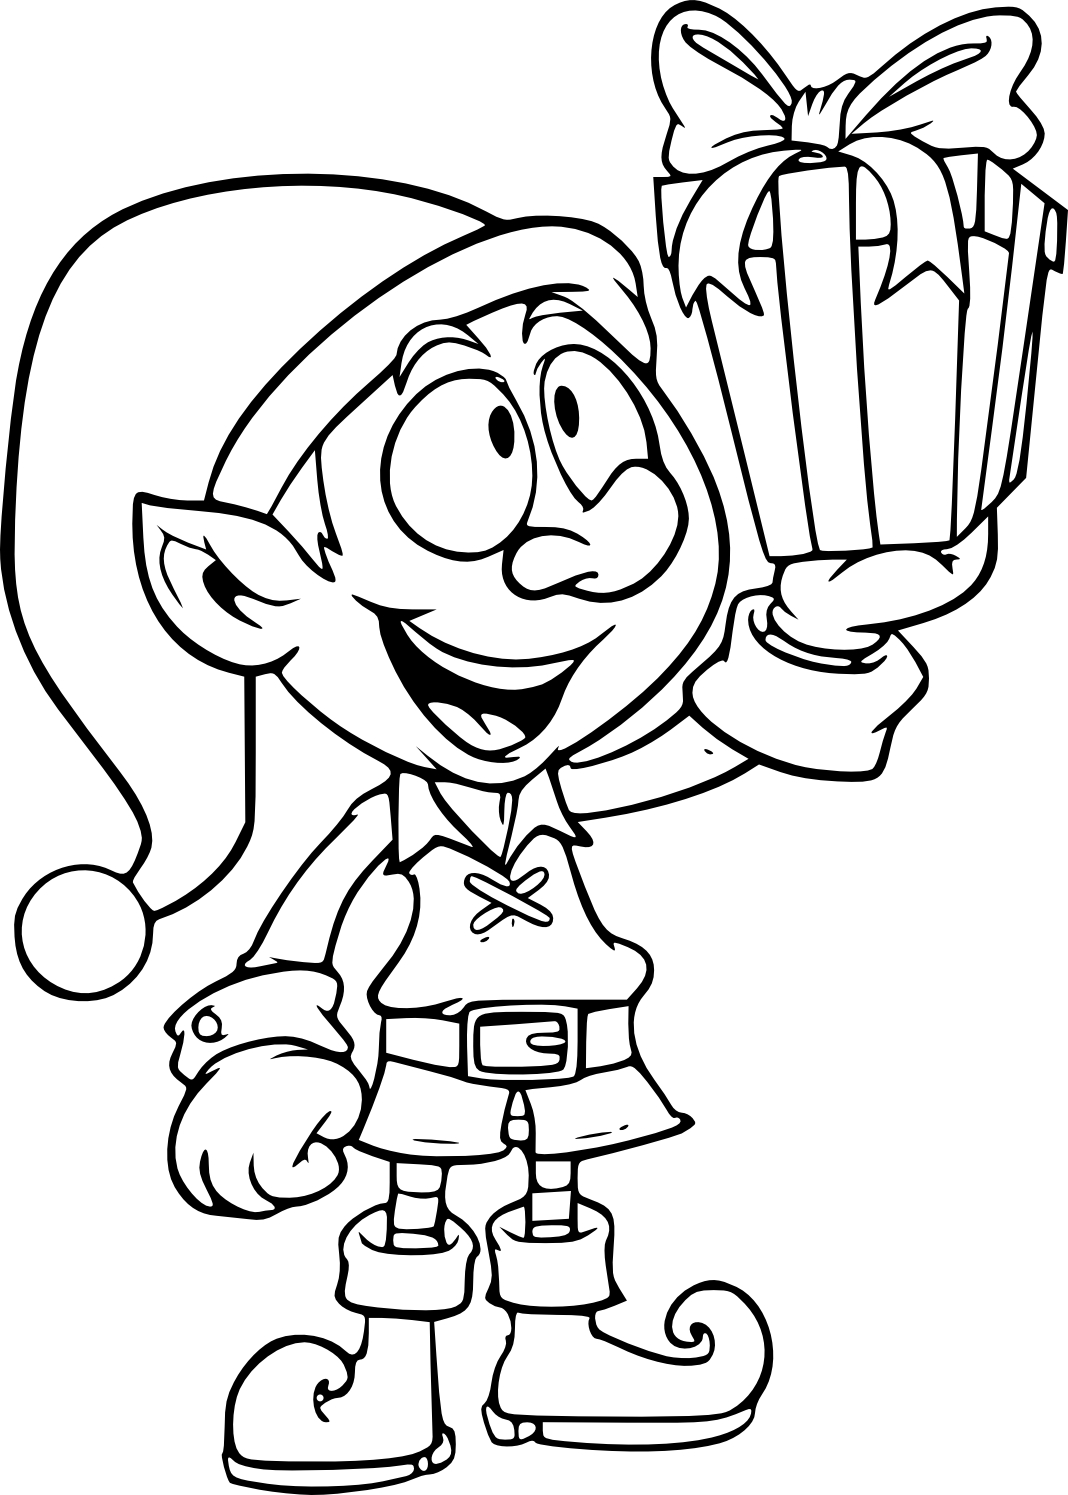 Elf With Gift coloring page